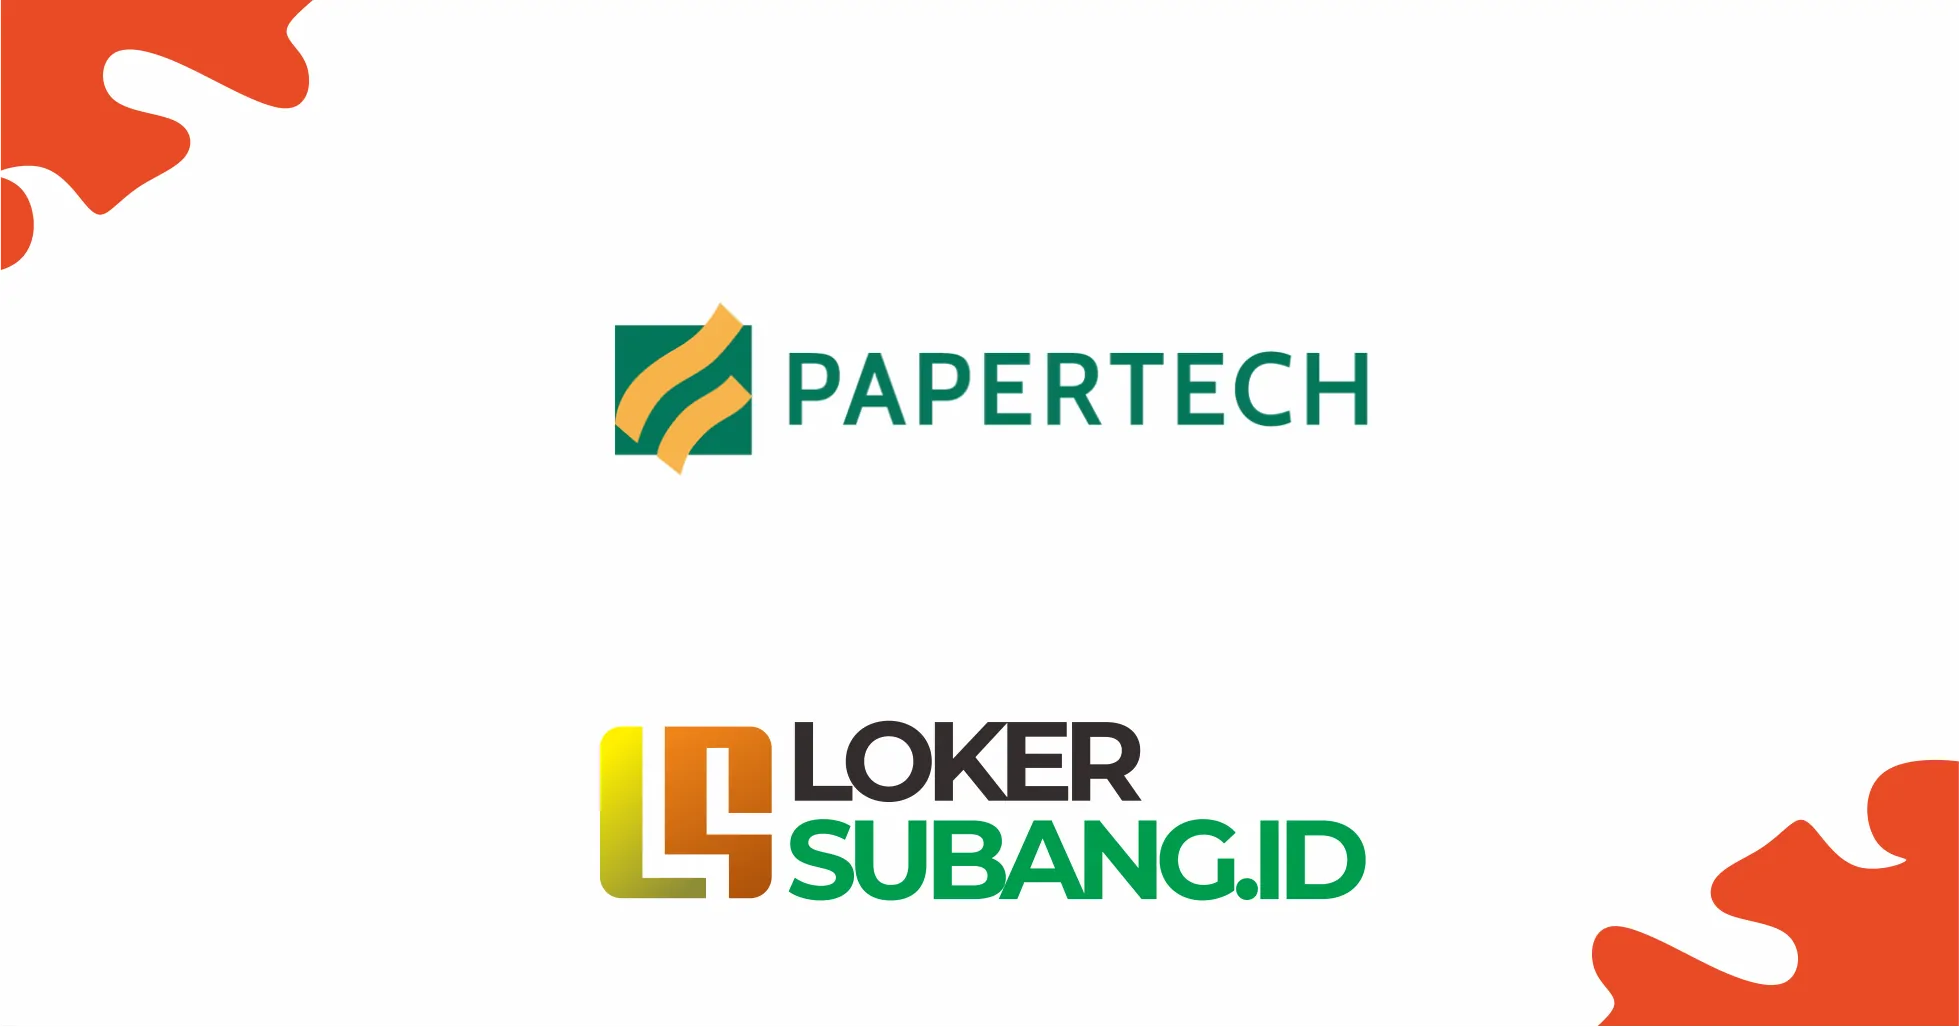 PT PAPERTECH INDONESIA